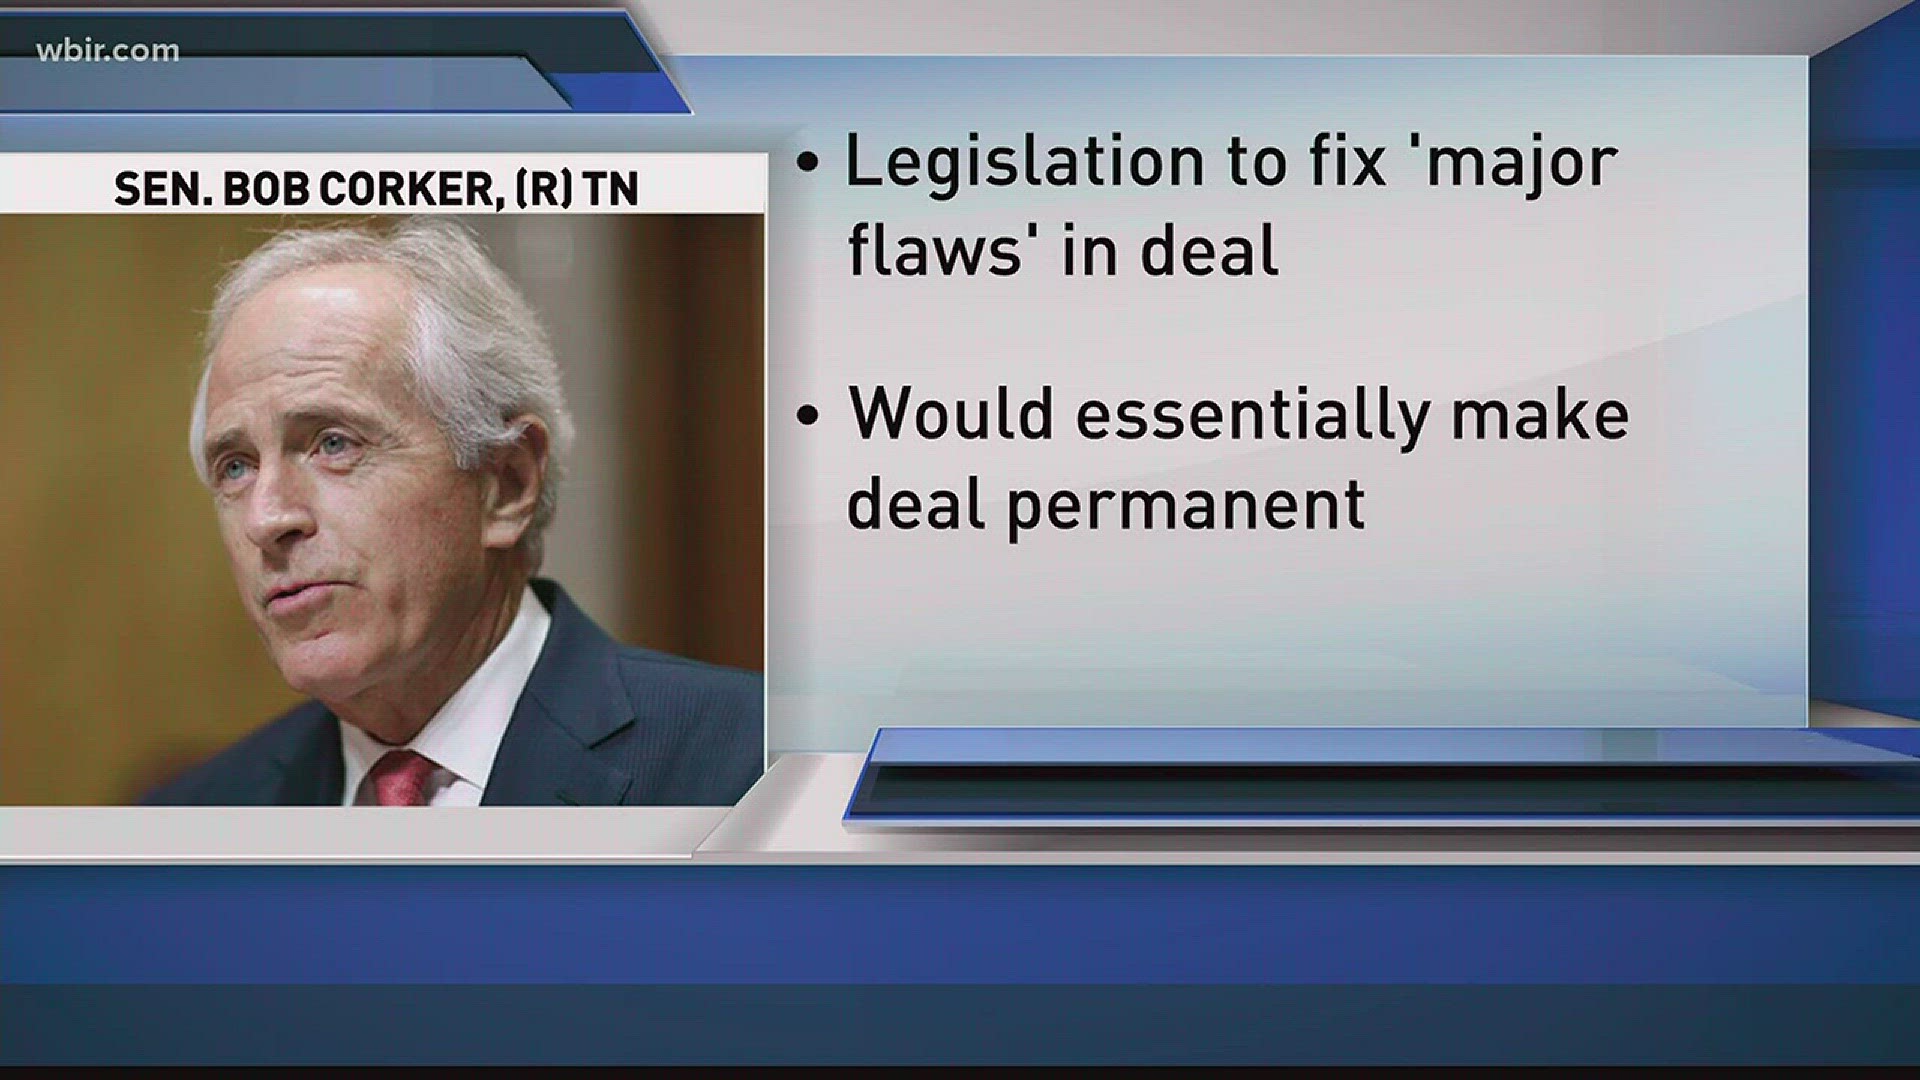 Oct. 13, 2017: As President Trump threatens to end U.S. involvement in the multi-nation Iran Nuclear Deal, Sen. Bob Corker says he plans to introduce legislation next week to fix what he calls "major flaws" in the deal.